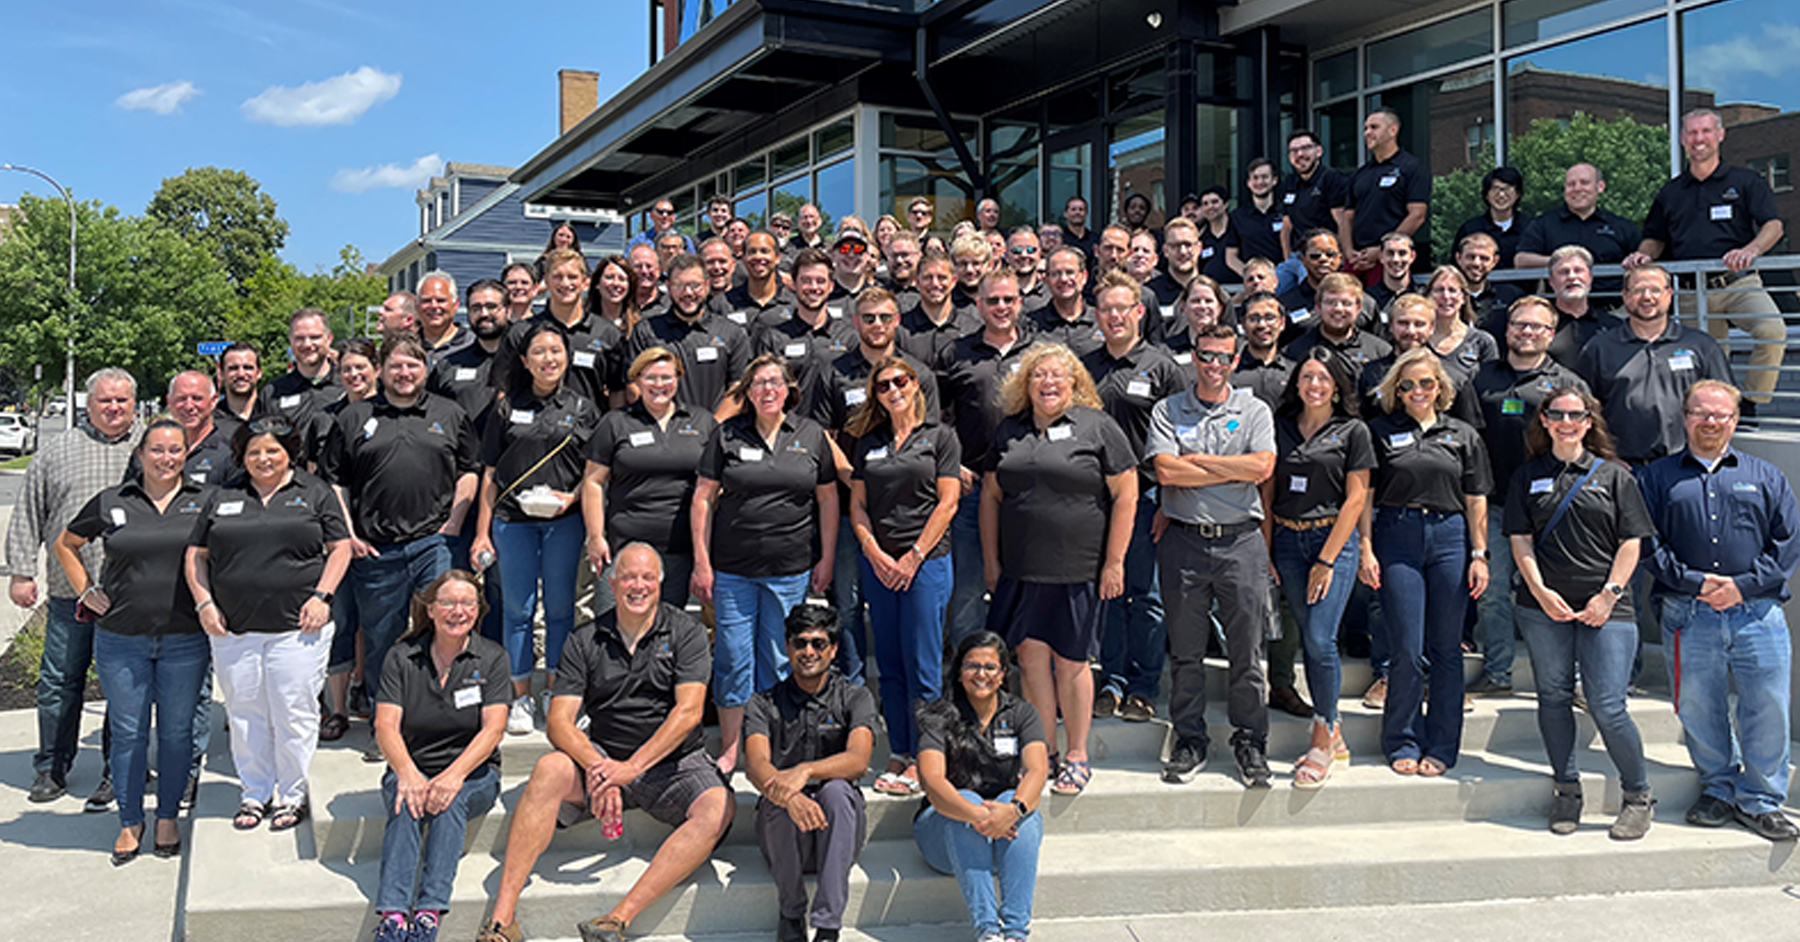 300 Employees Group Photo